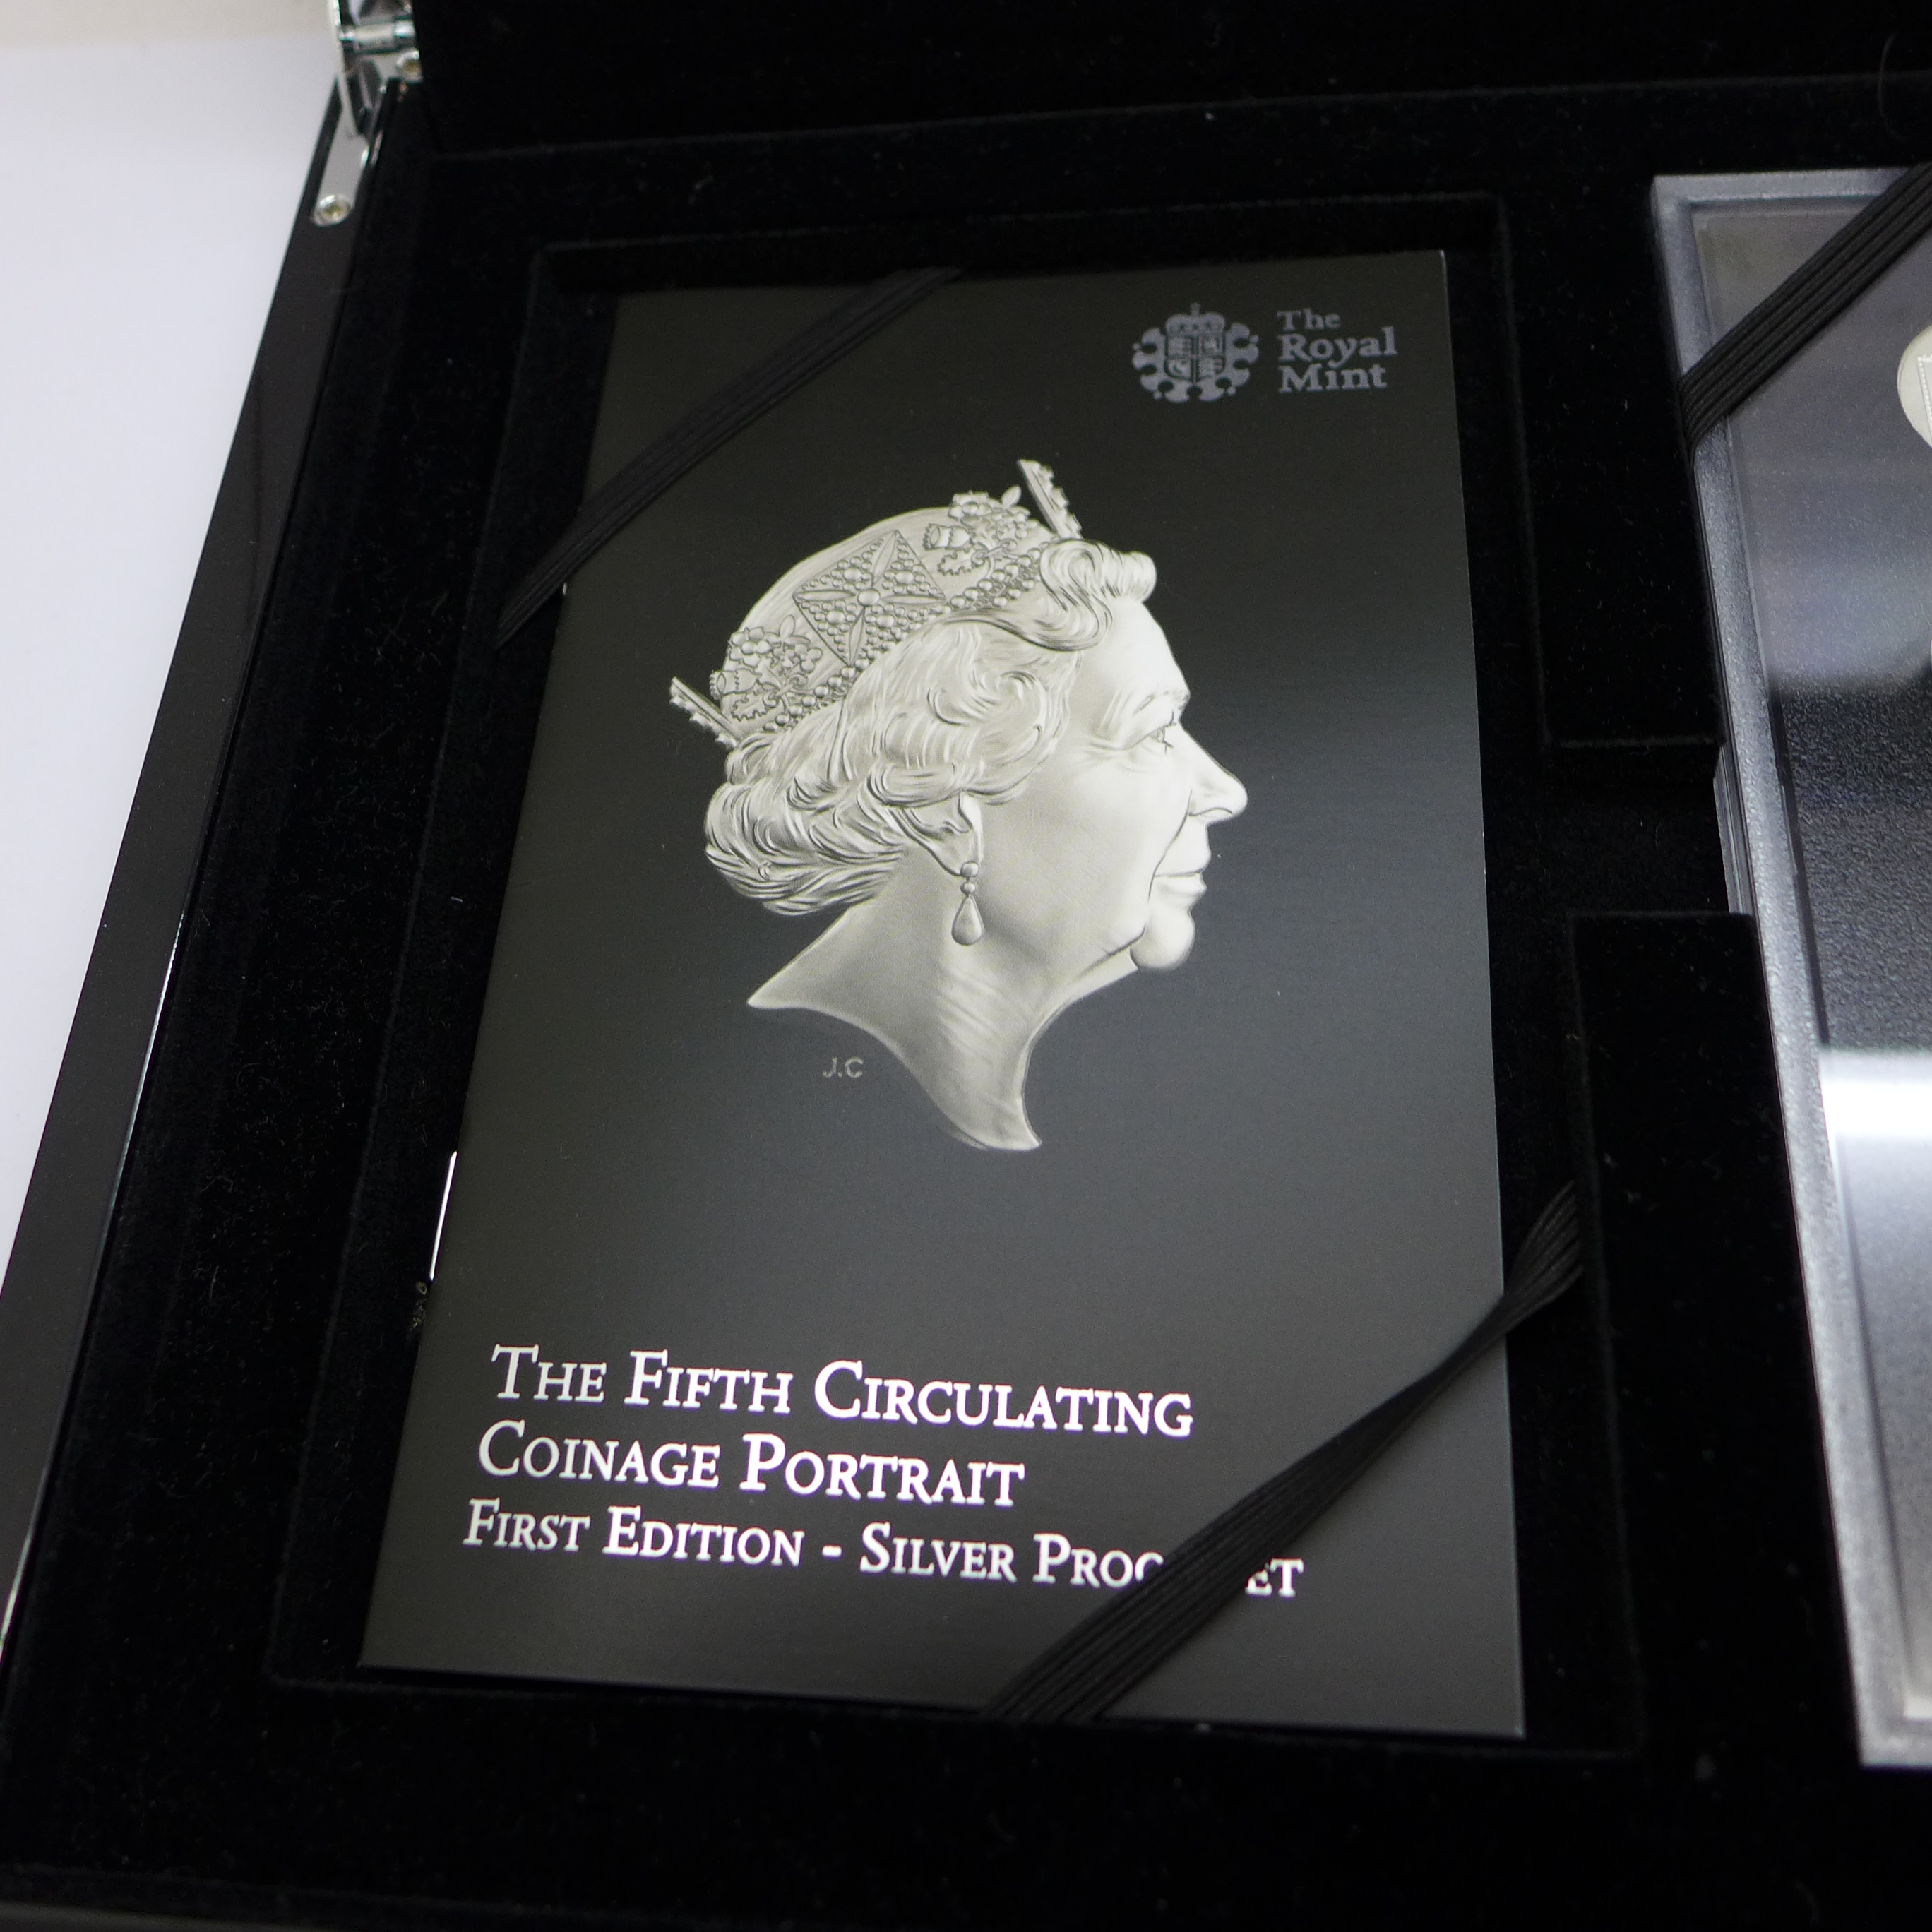 A 2015 silver proof coin set, the fifth circulation coinage portrait, first edition set, boxed - Image 5 of 7